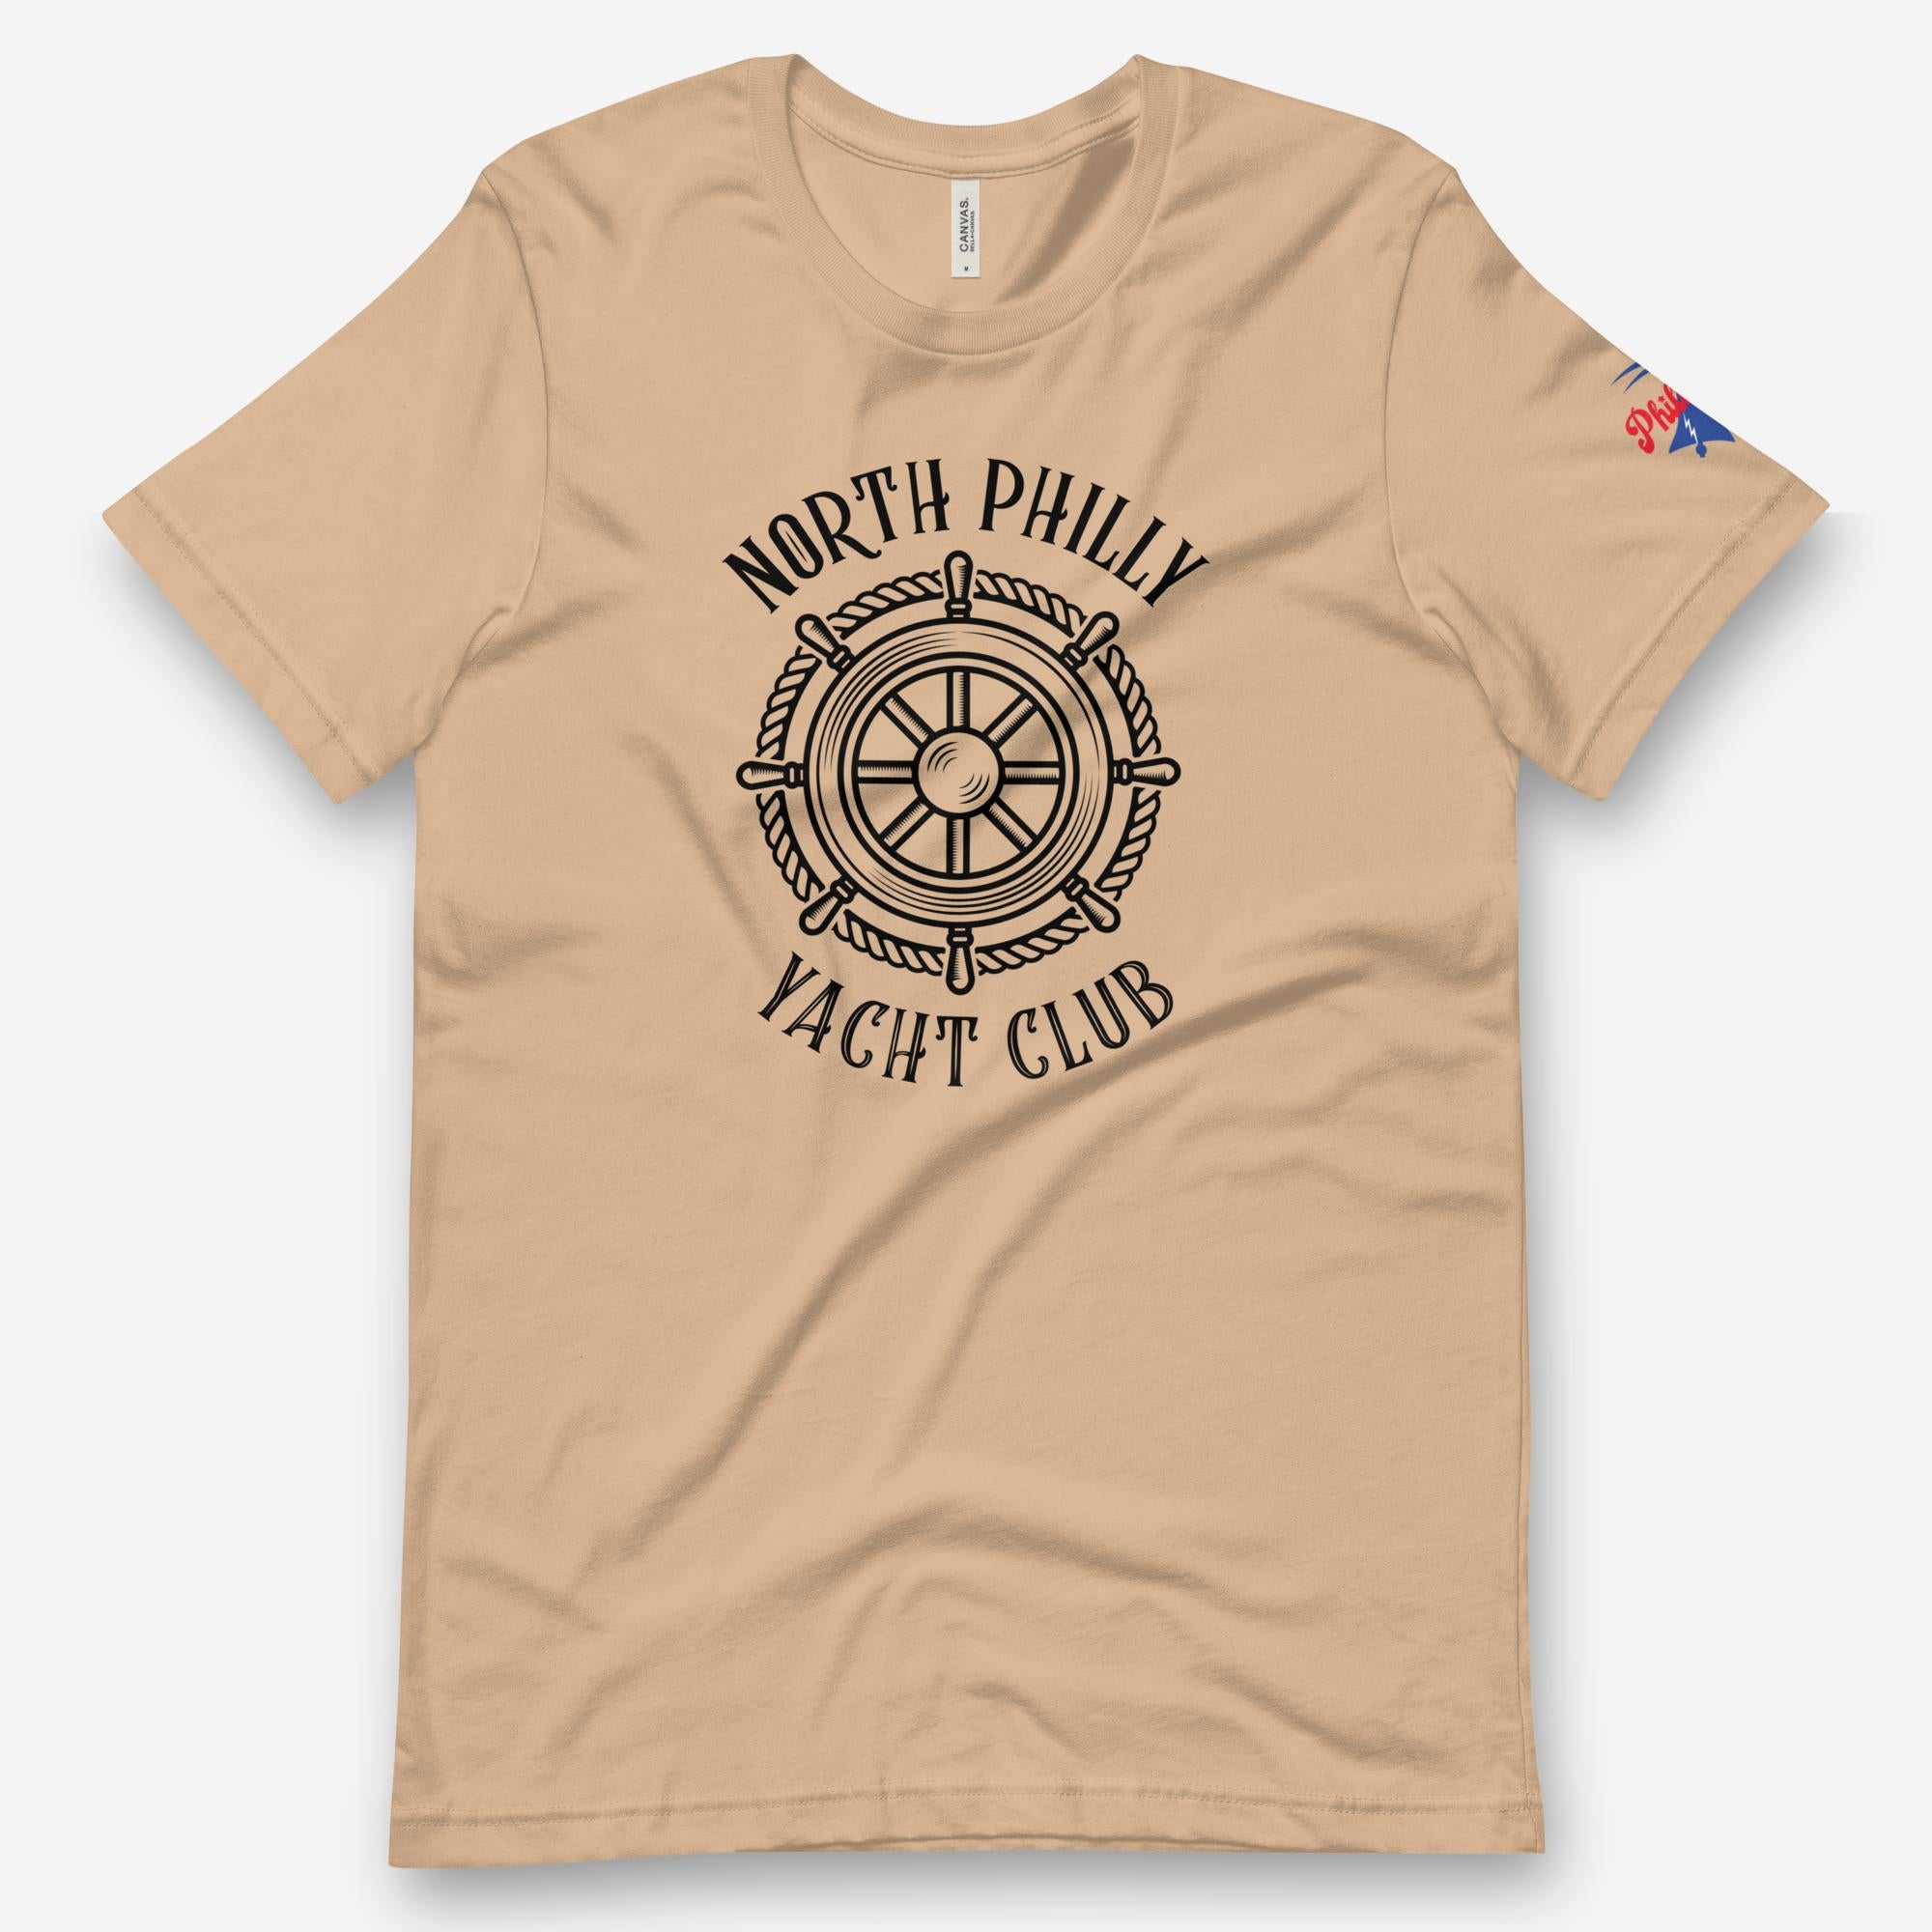 "North Philly Yacht Club" Tee